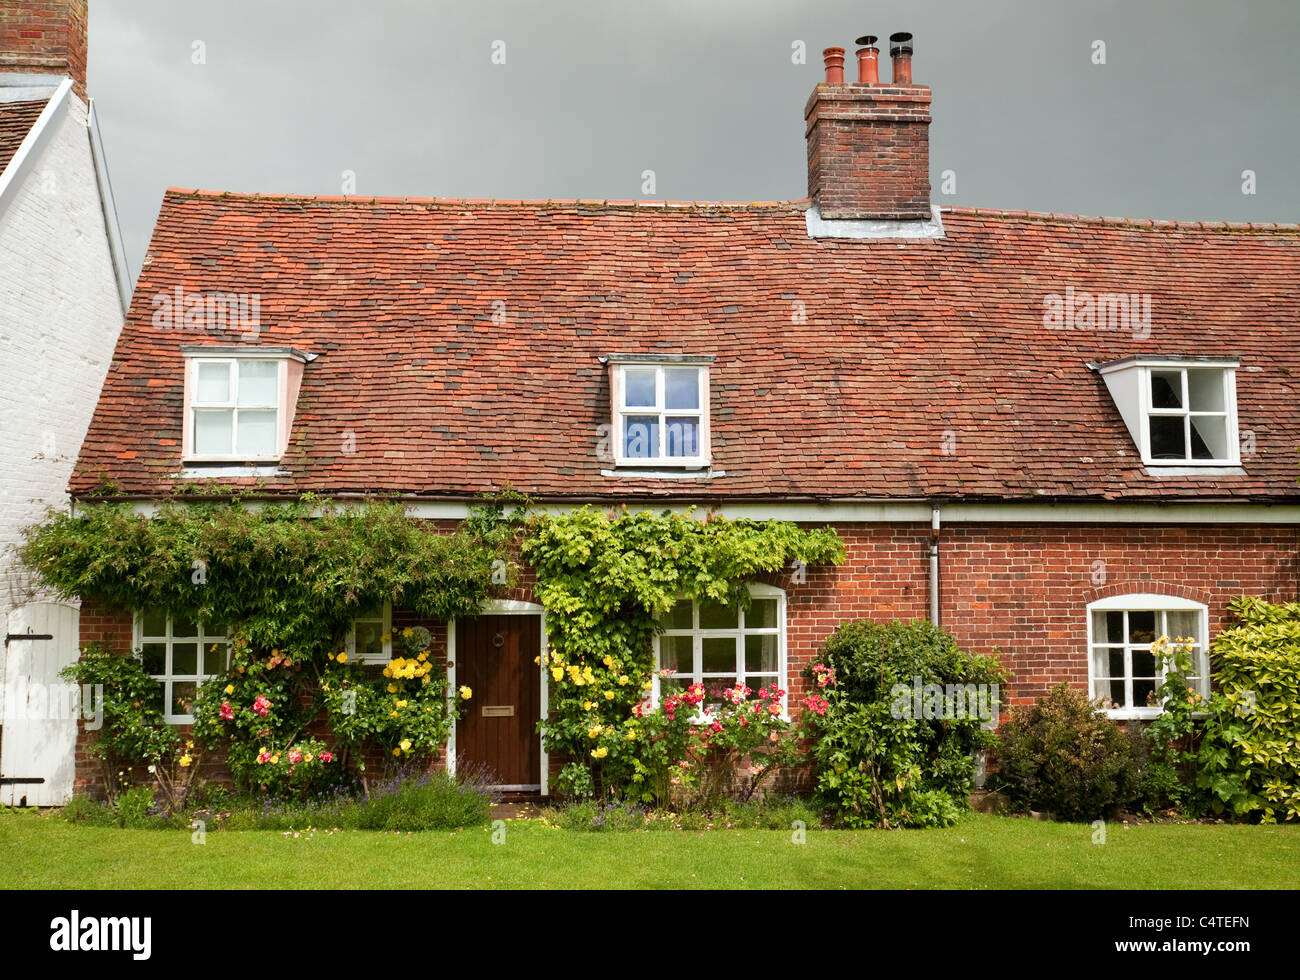 Terraced English country cottages on the village green, Orford Village Suffolk UK Stock Photo